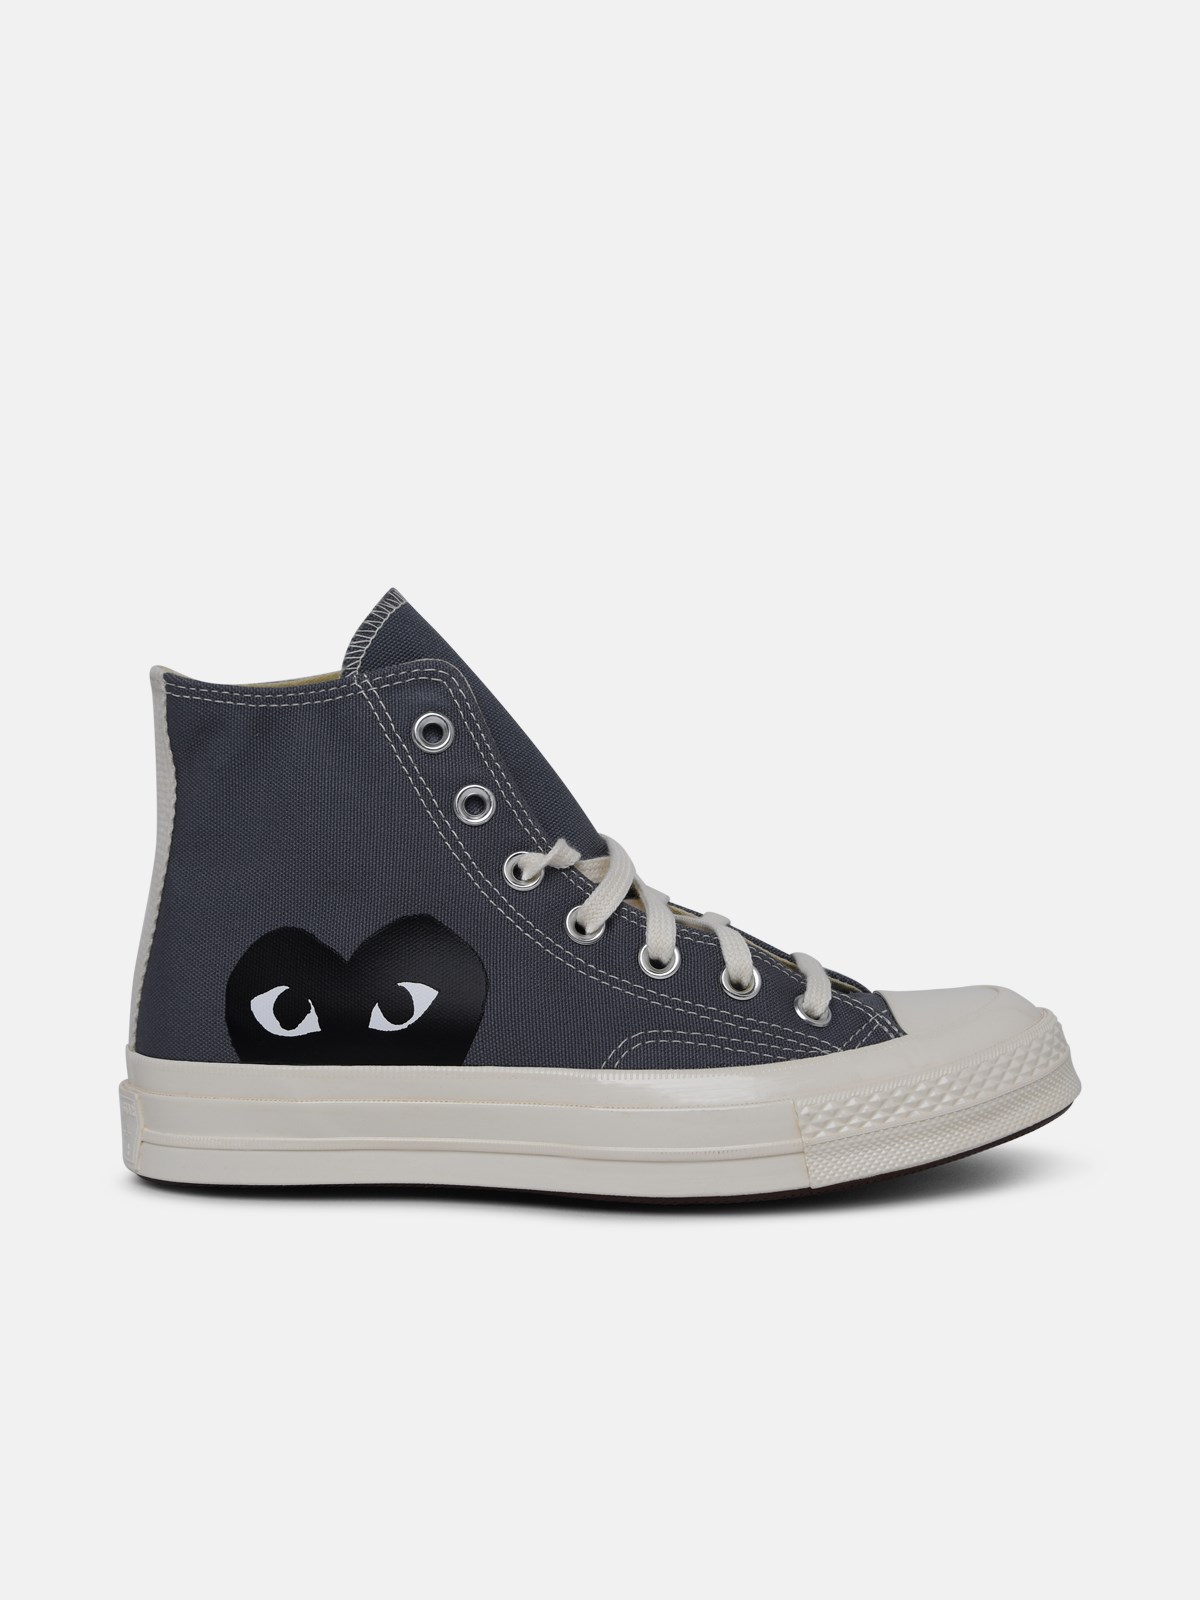 Comme Des Garçons Play X Converse High Top Grey Canvas Sneakers In Blue